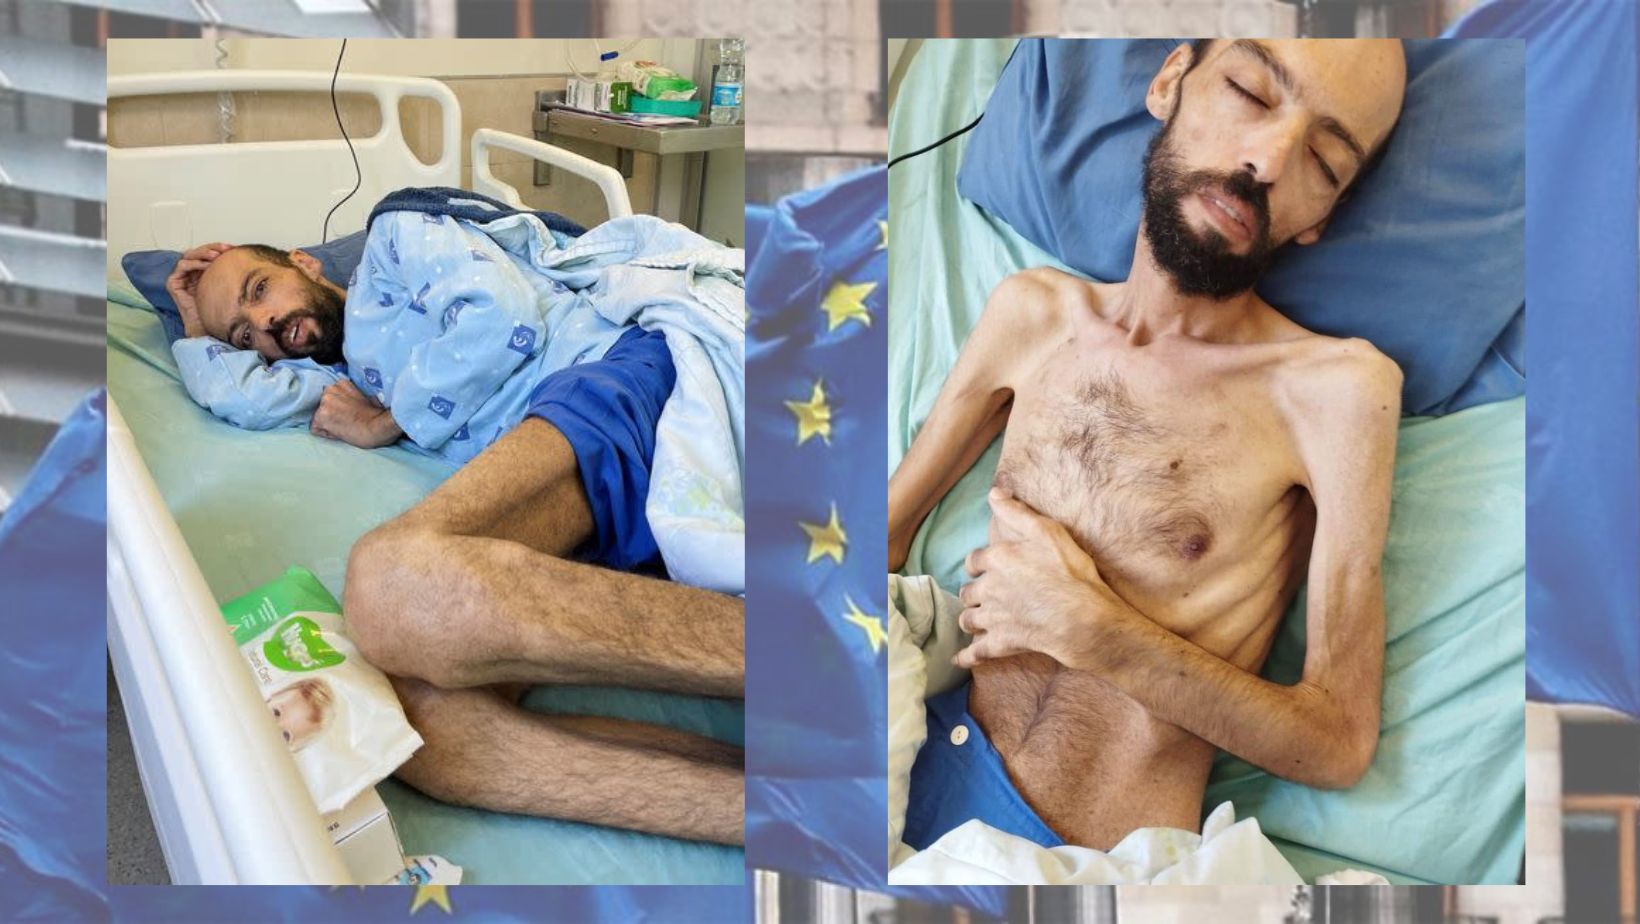 EU Shocked by Pictures of Nothing but Skin, Bones of Palestinian Hunger-Striker Detainee